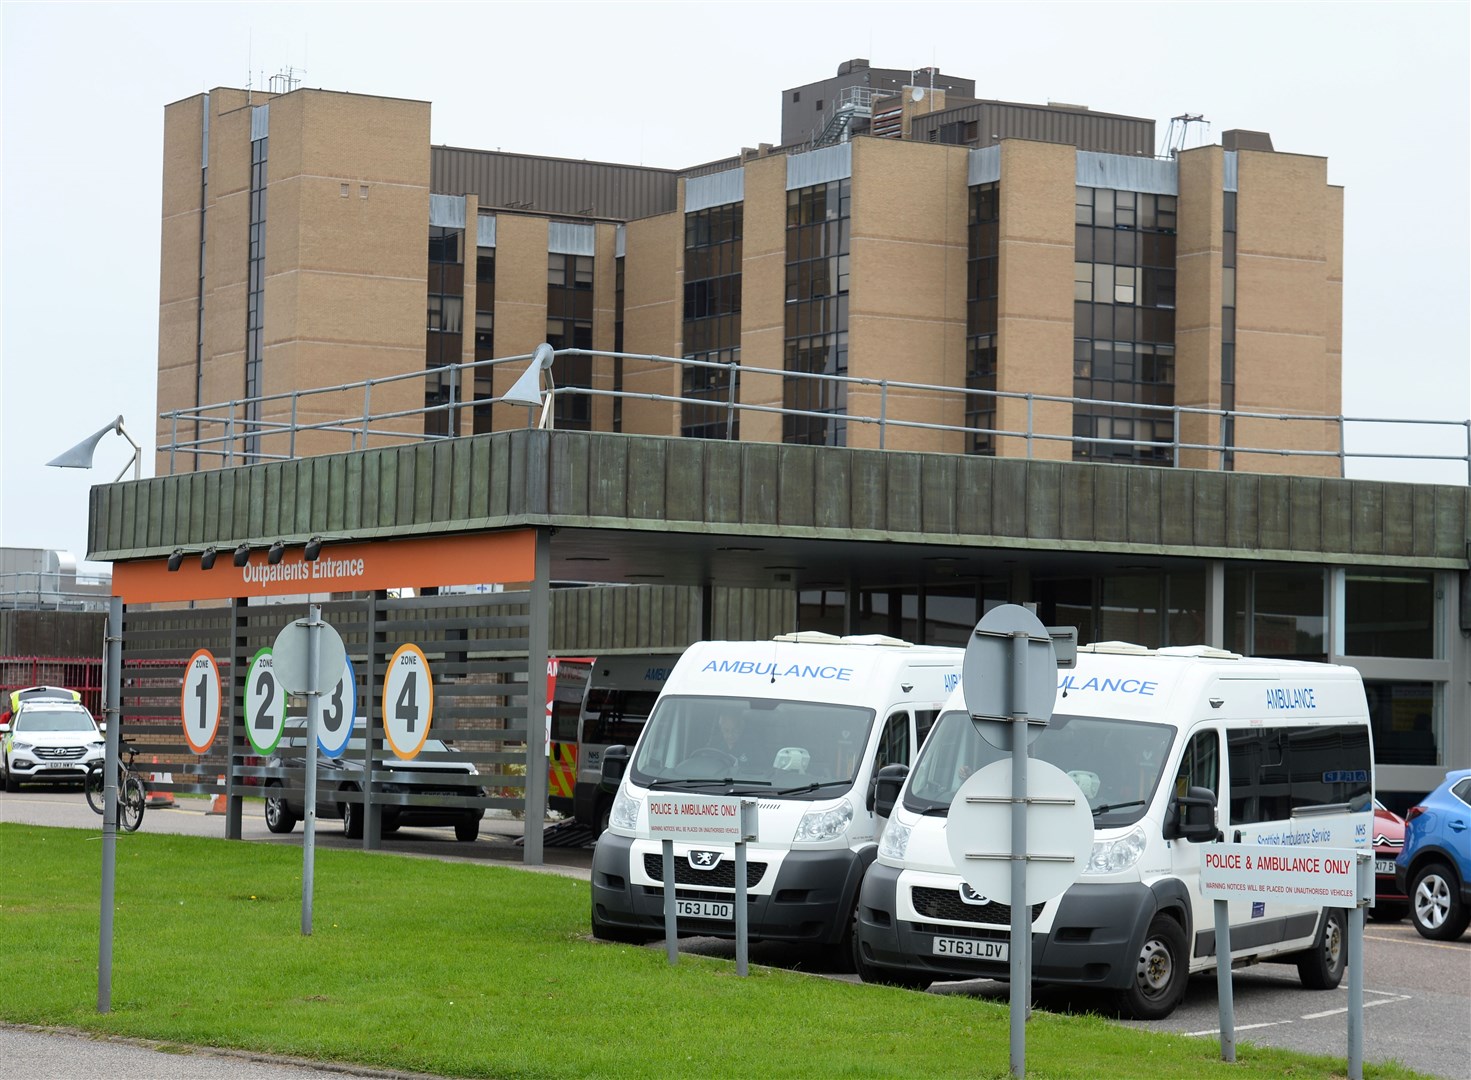 A large proportion of patients from across the Highlands end up here, at Raigmore Hospital, because many areas lack the facilities closer to people's homes.